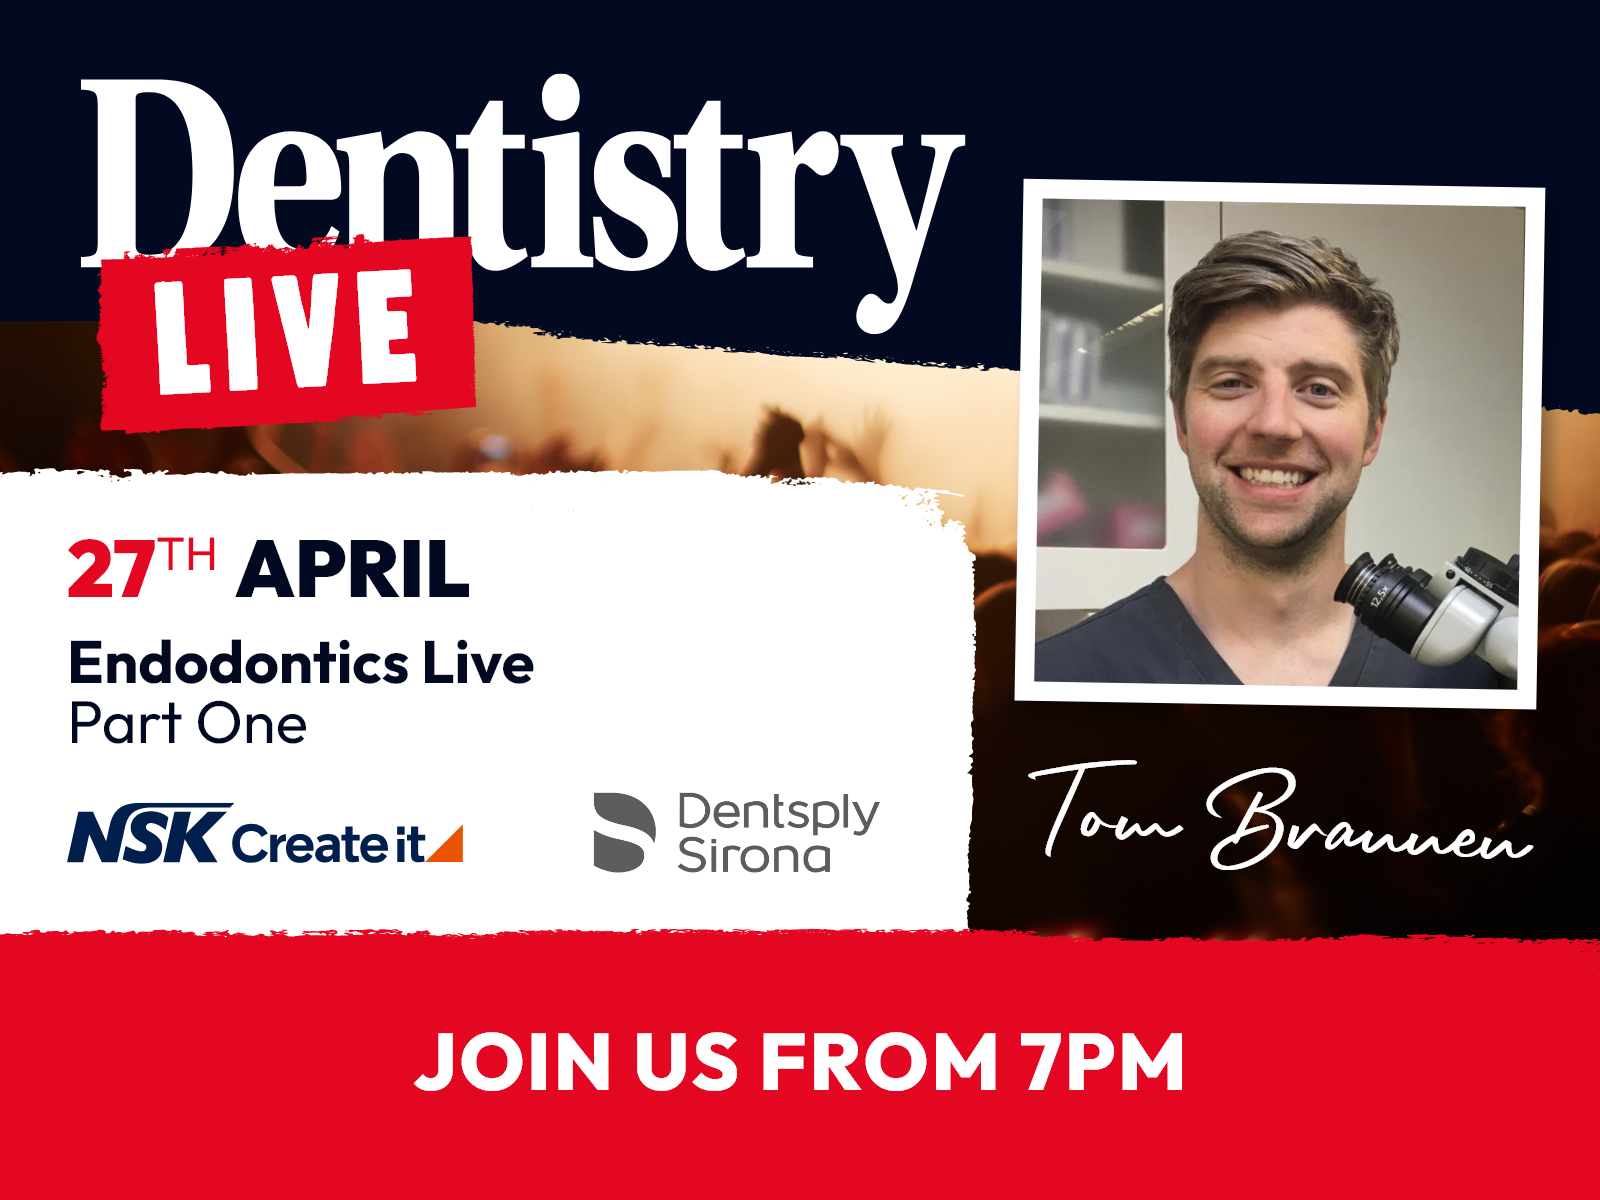 Join Tom Brannen this Thursday 27 April at 7pm for a live broadcast of root canal treatment – sign up now!